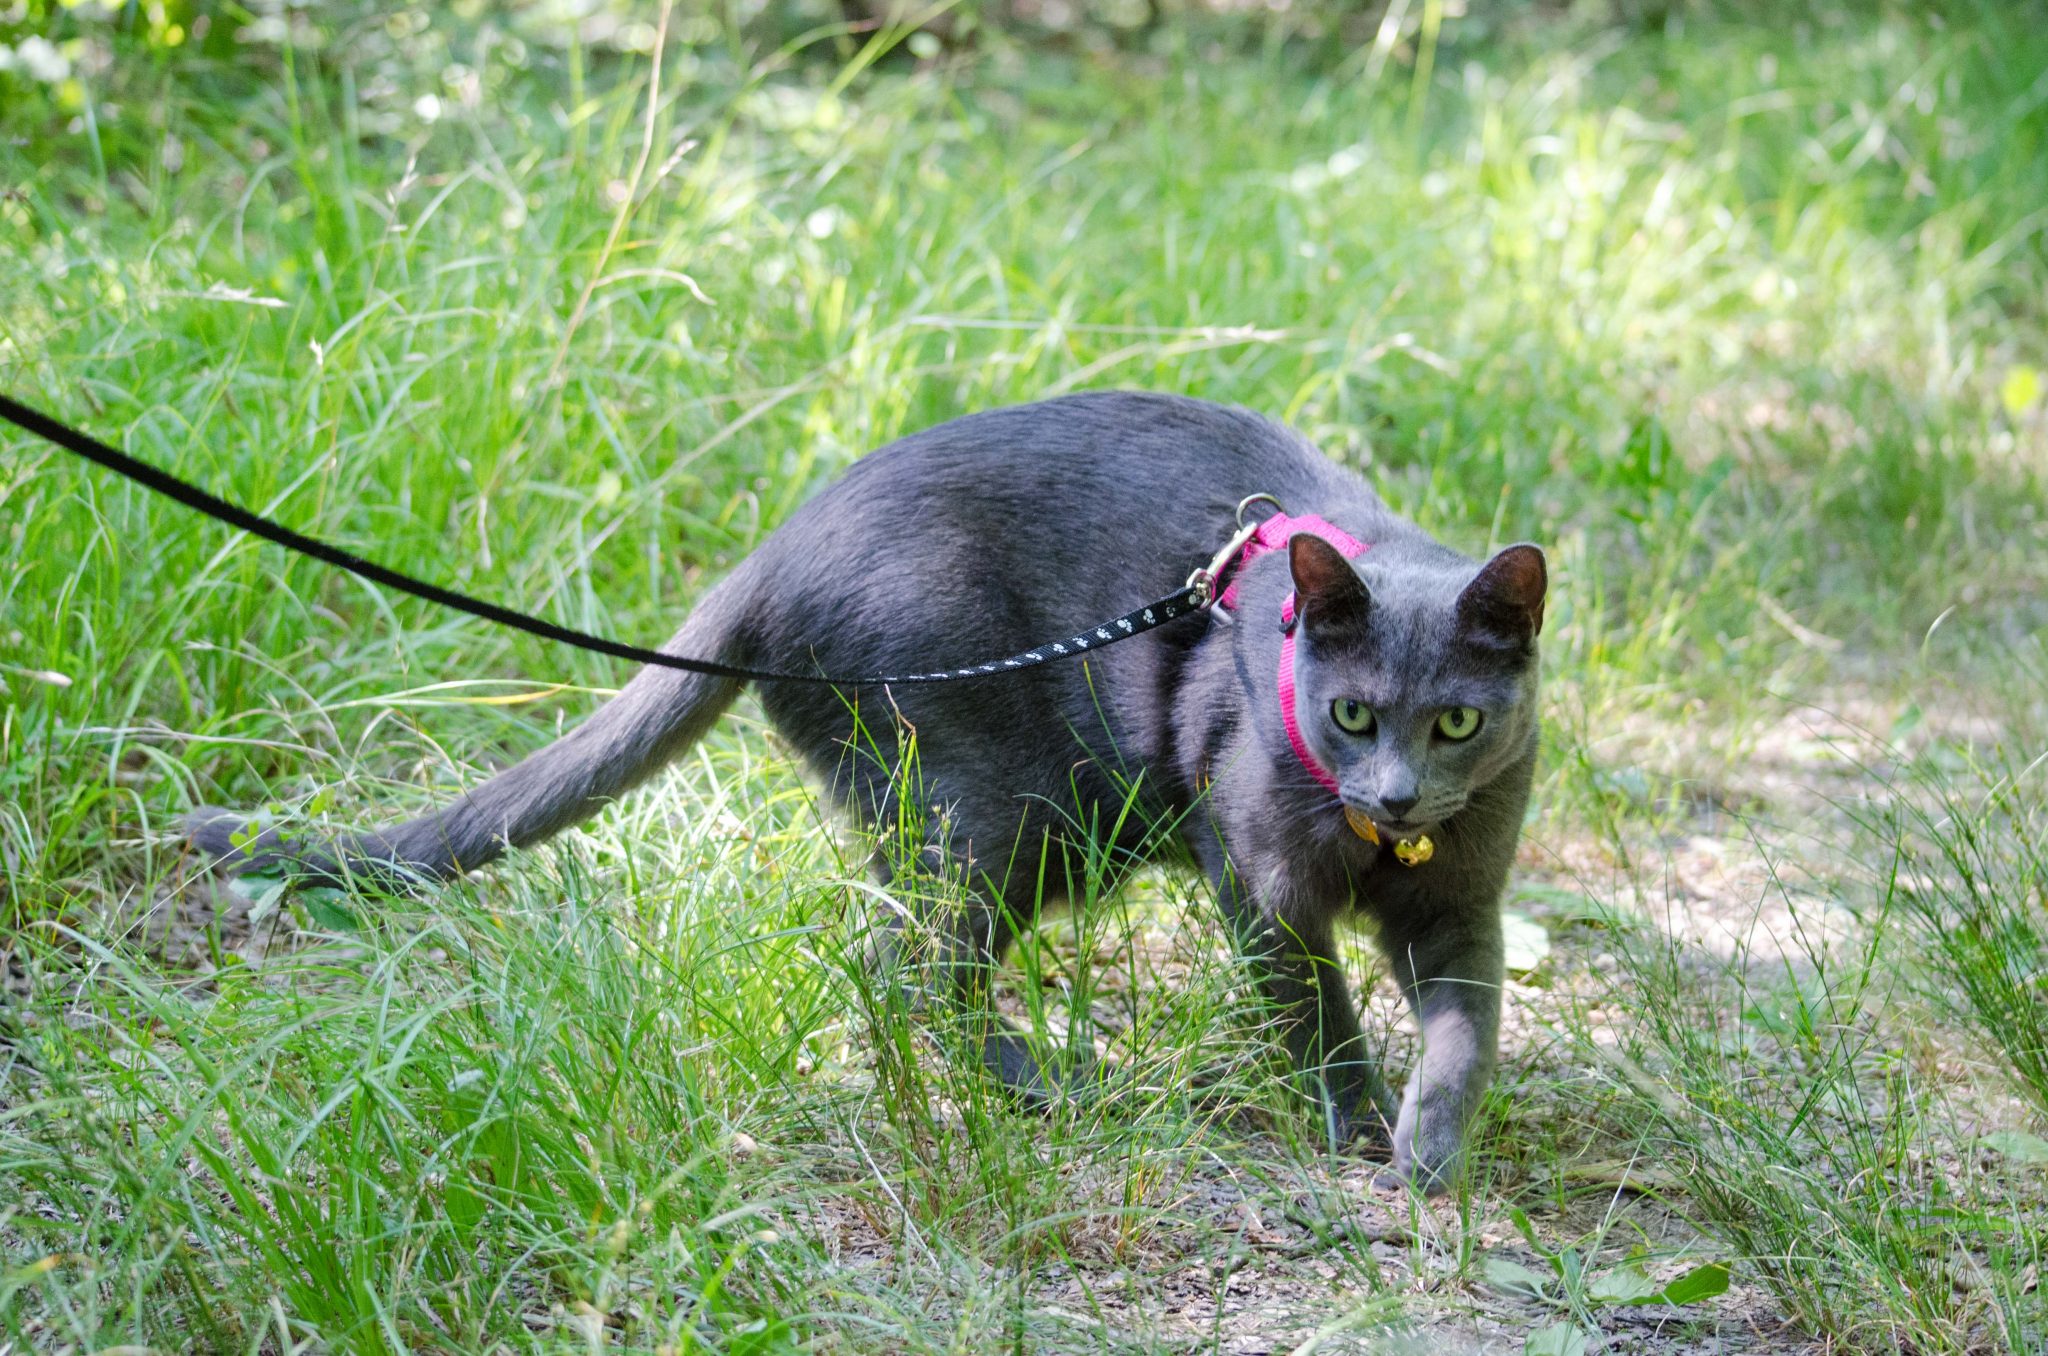 Shade the cat on a leash